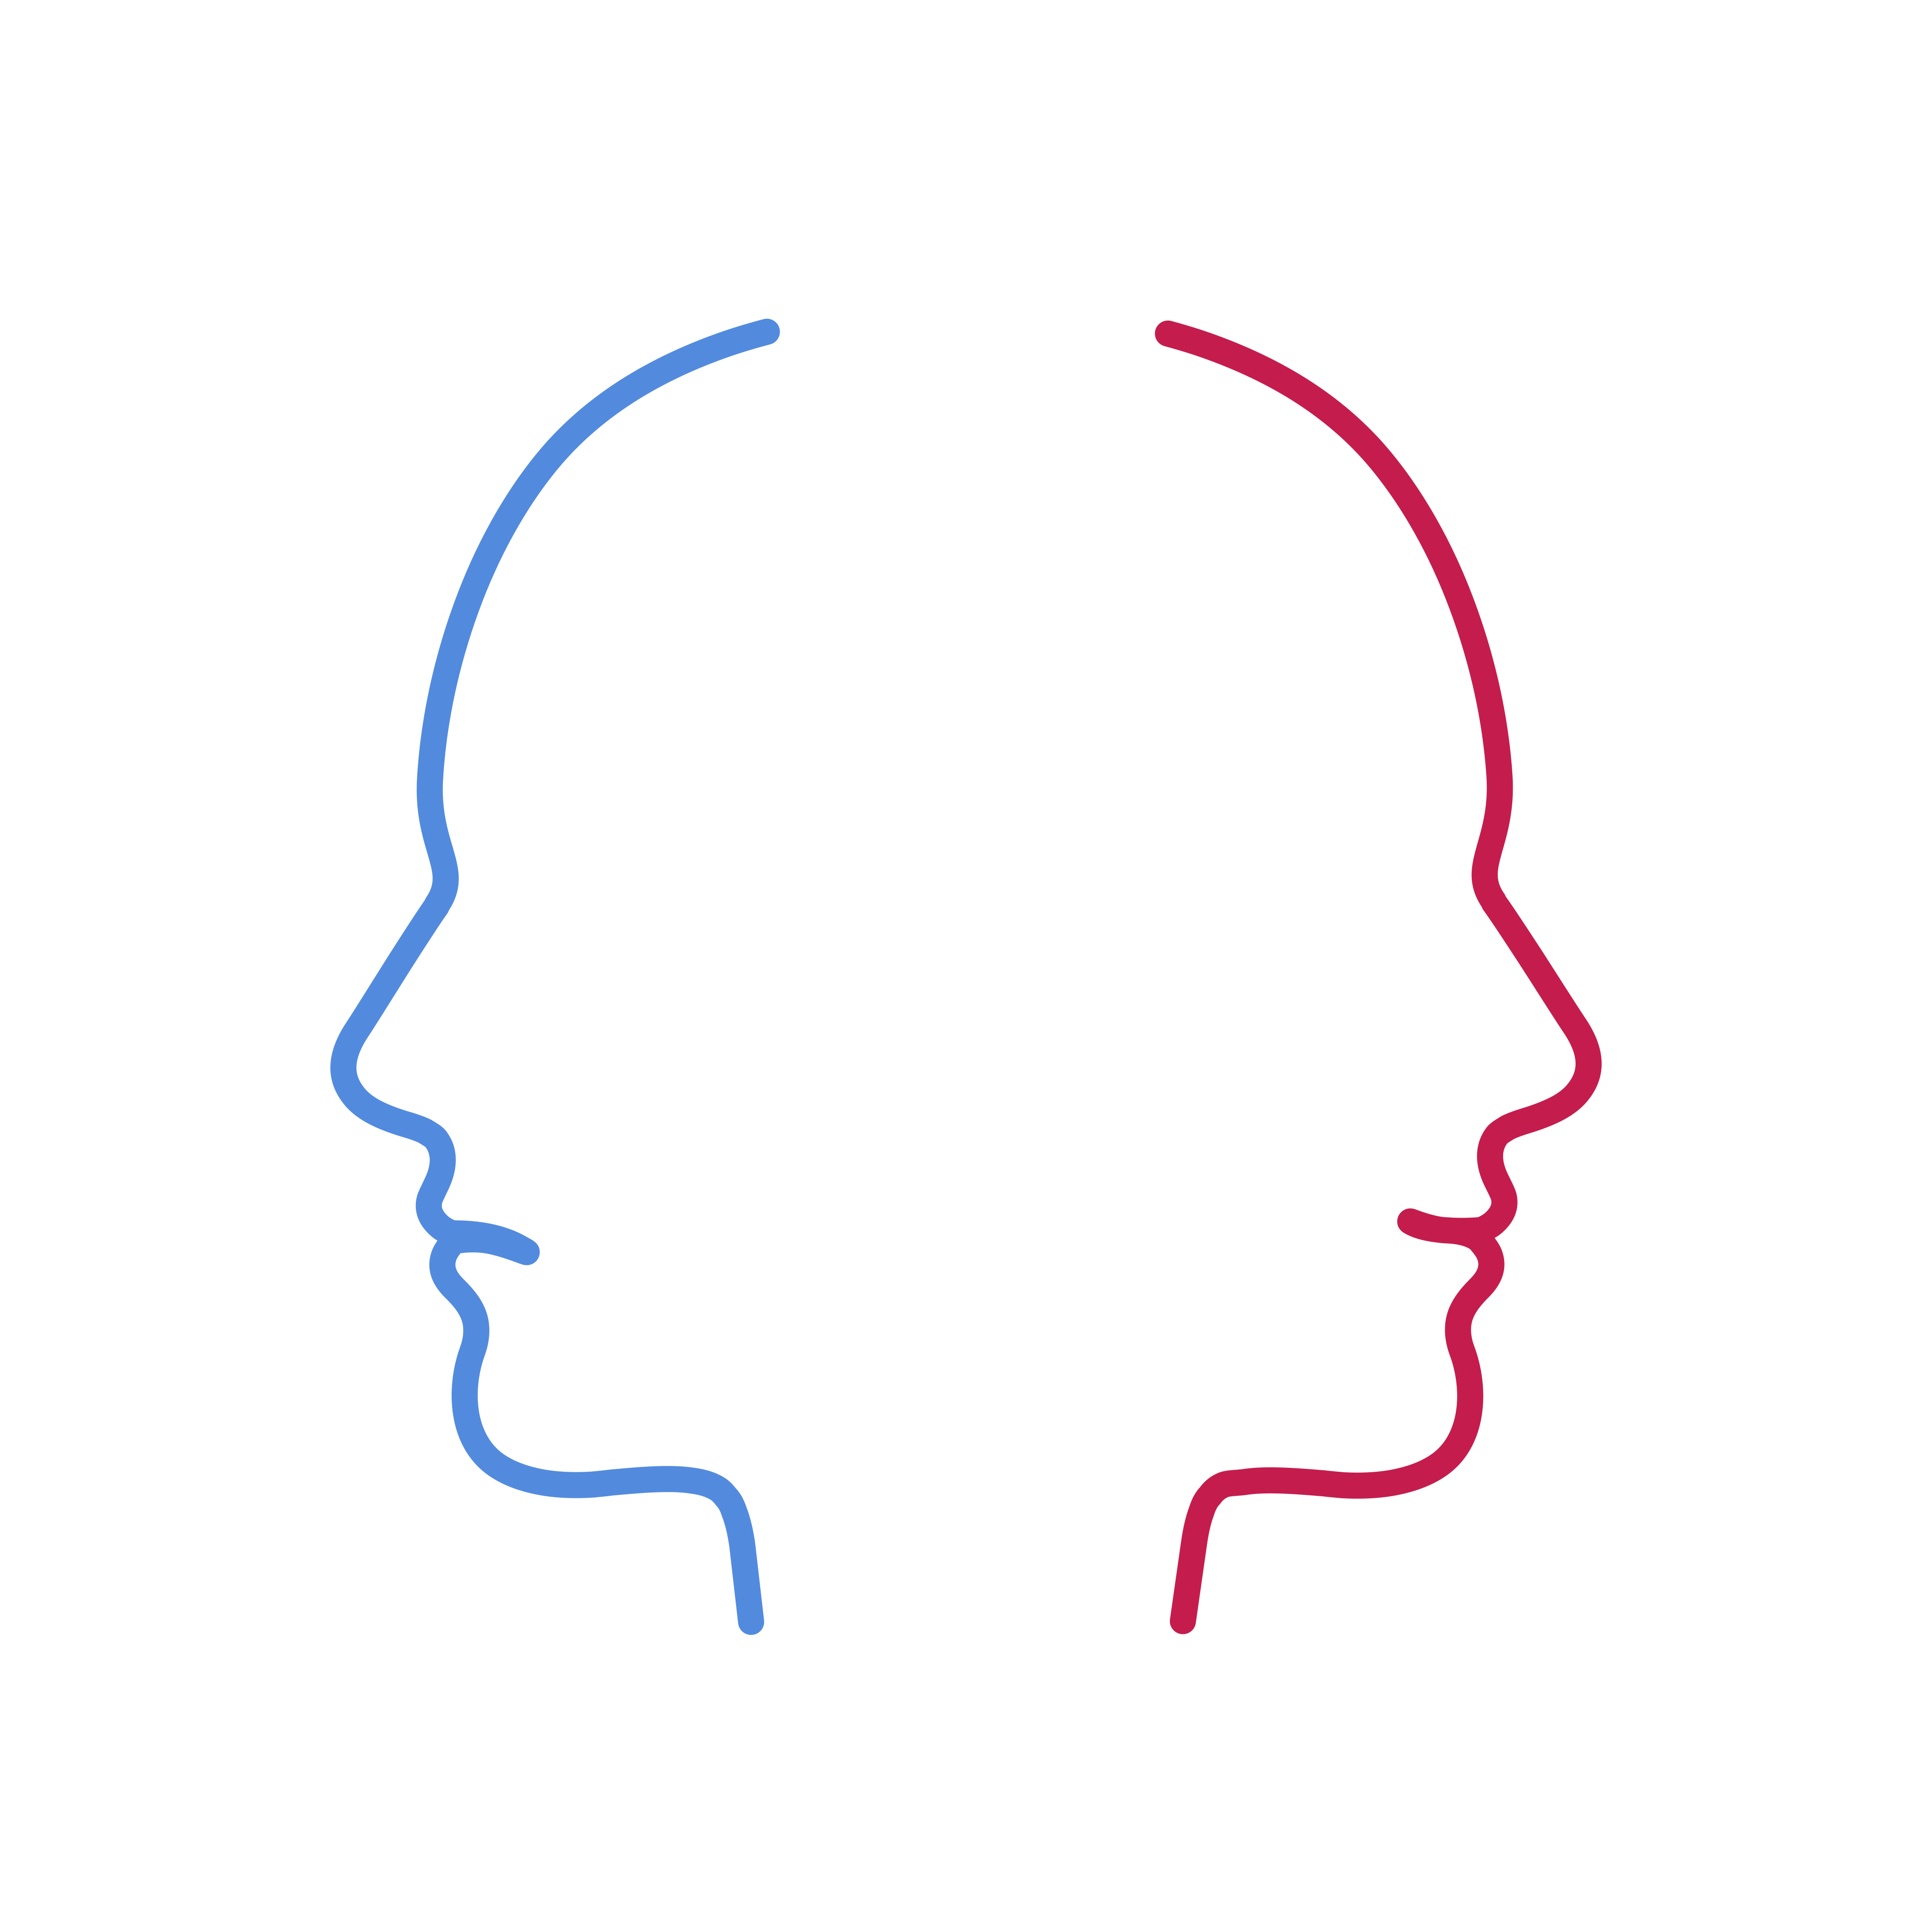 A rendition of the side profiles of two faces opposite each other, one is red and one is blue